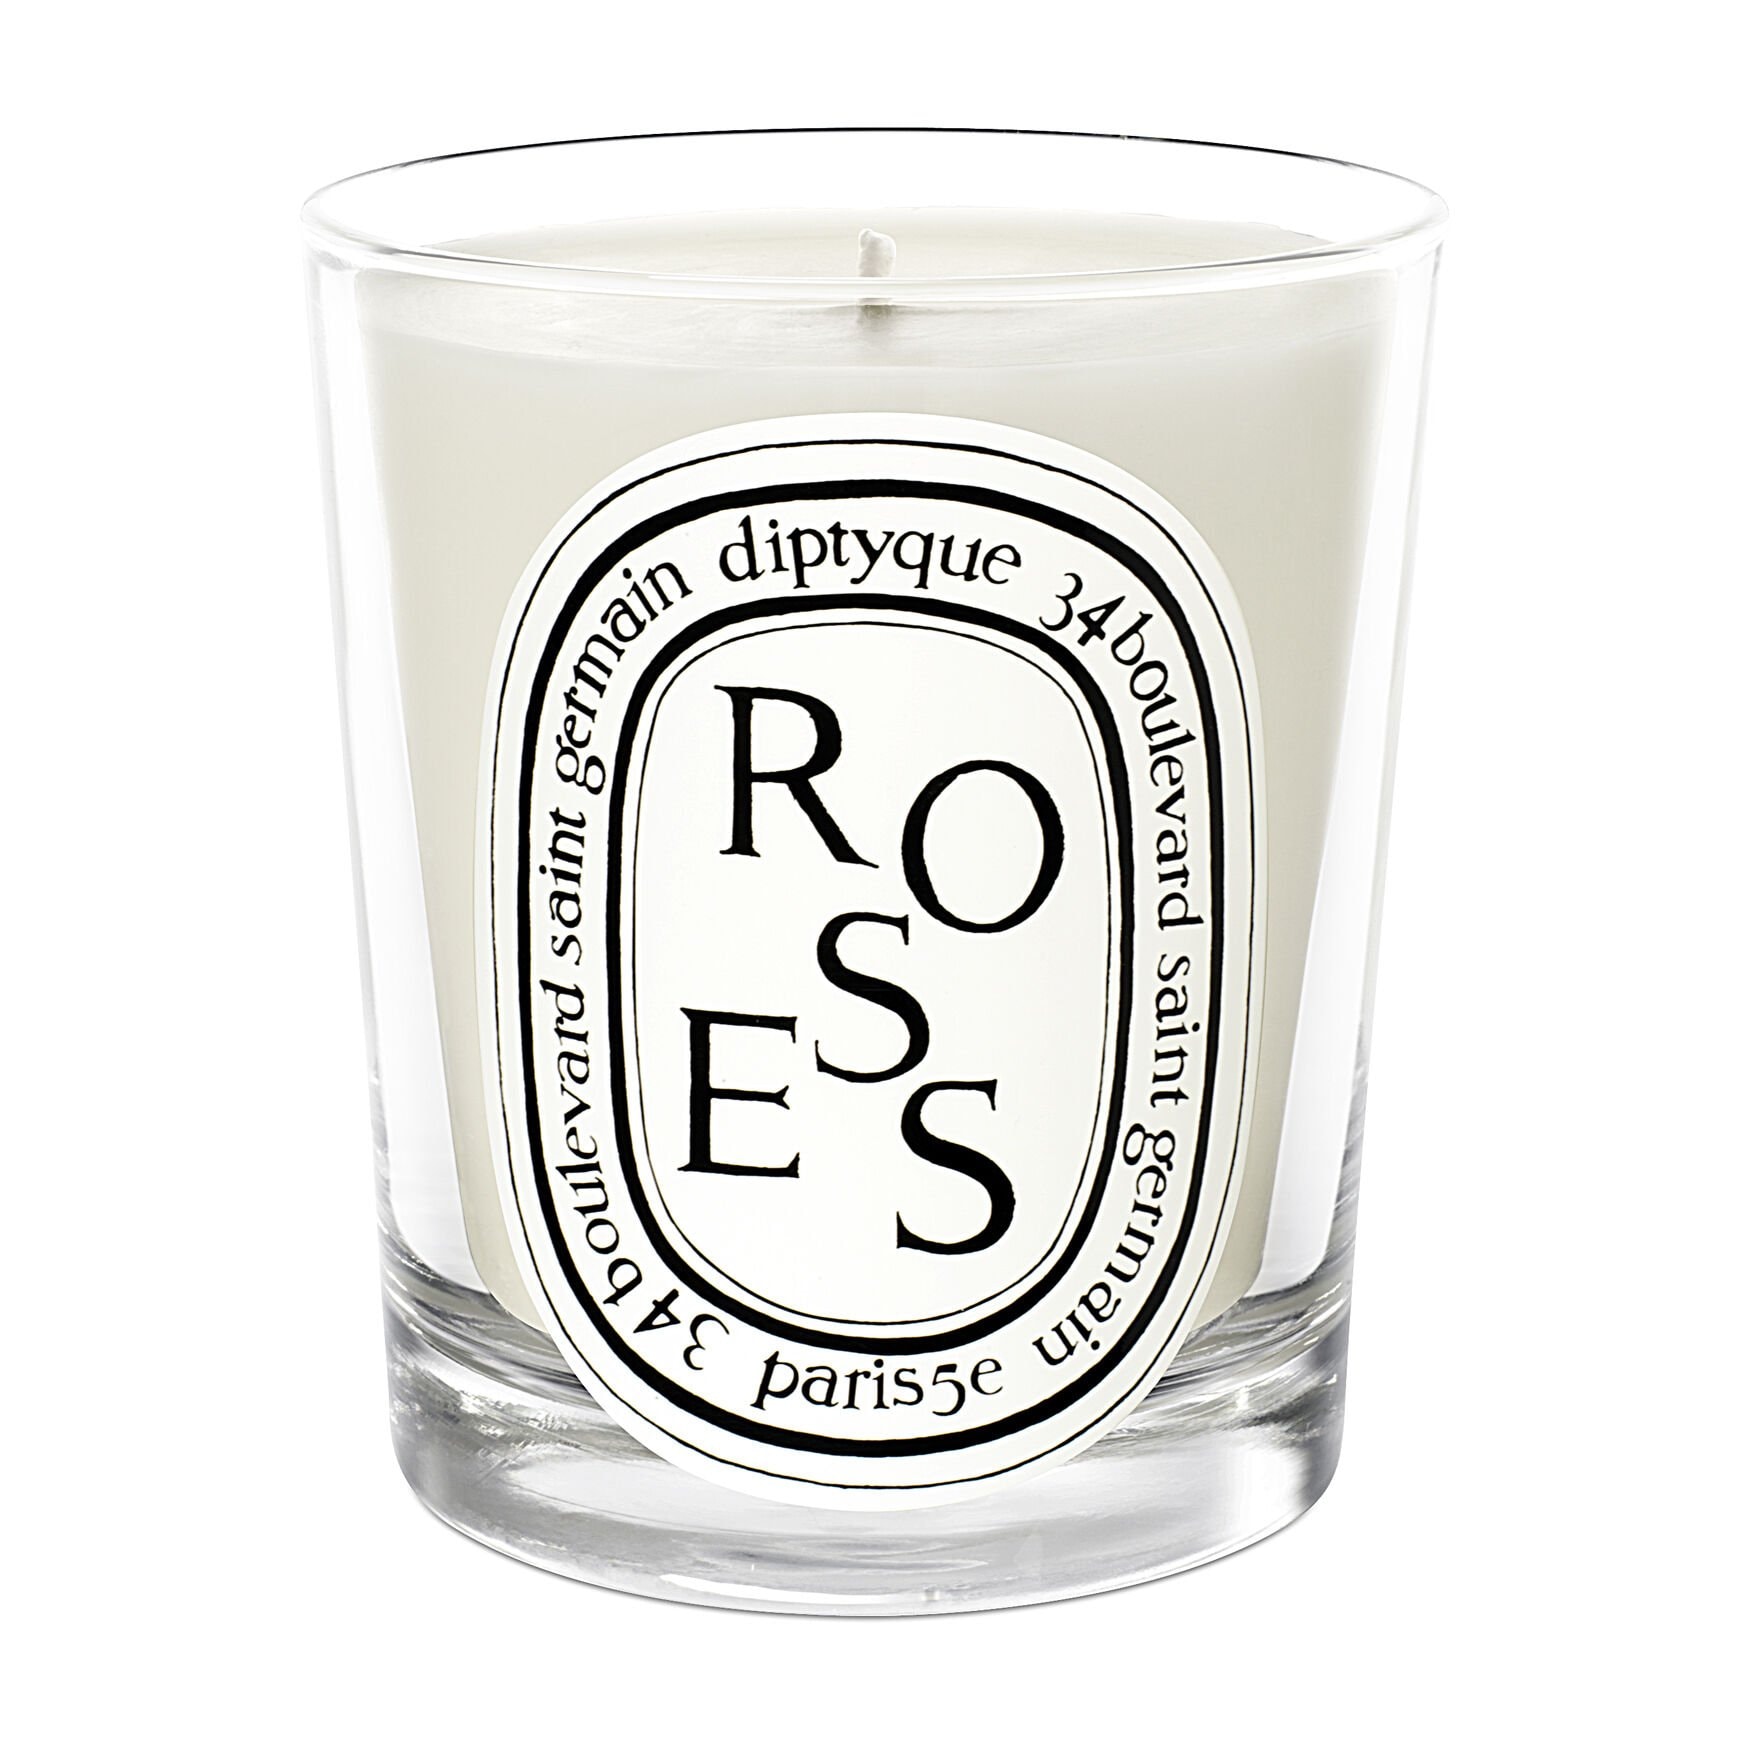 Diptyque Roses candle